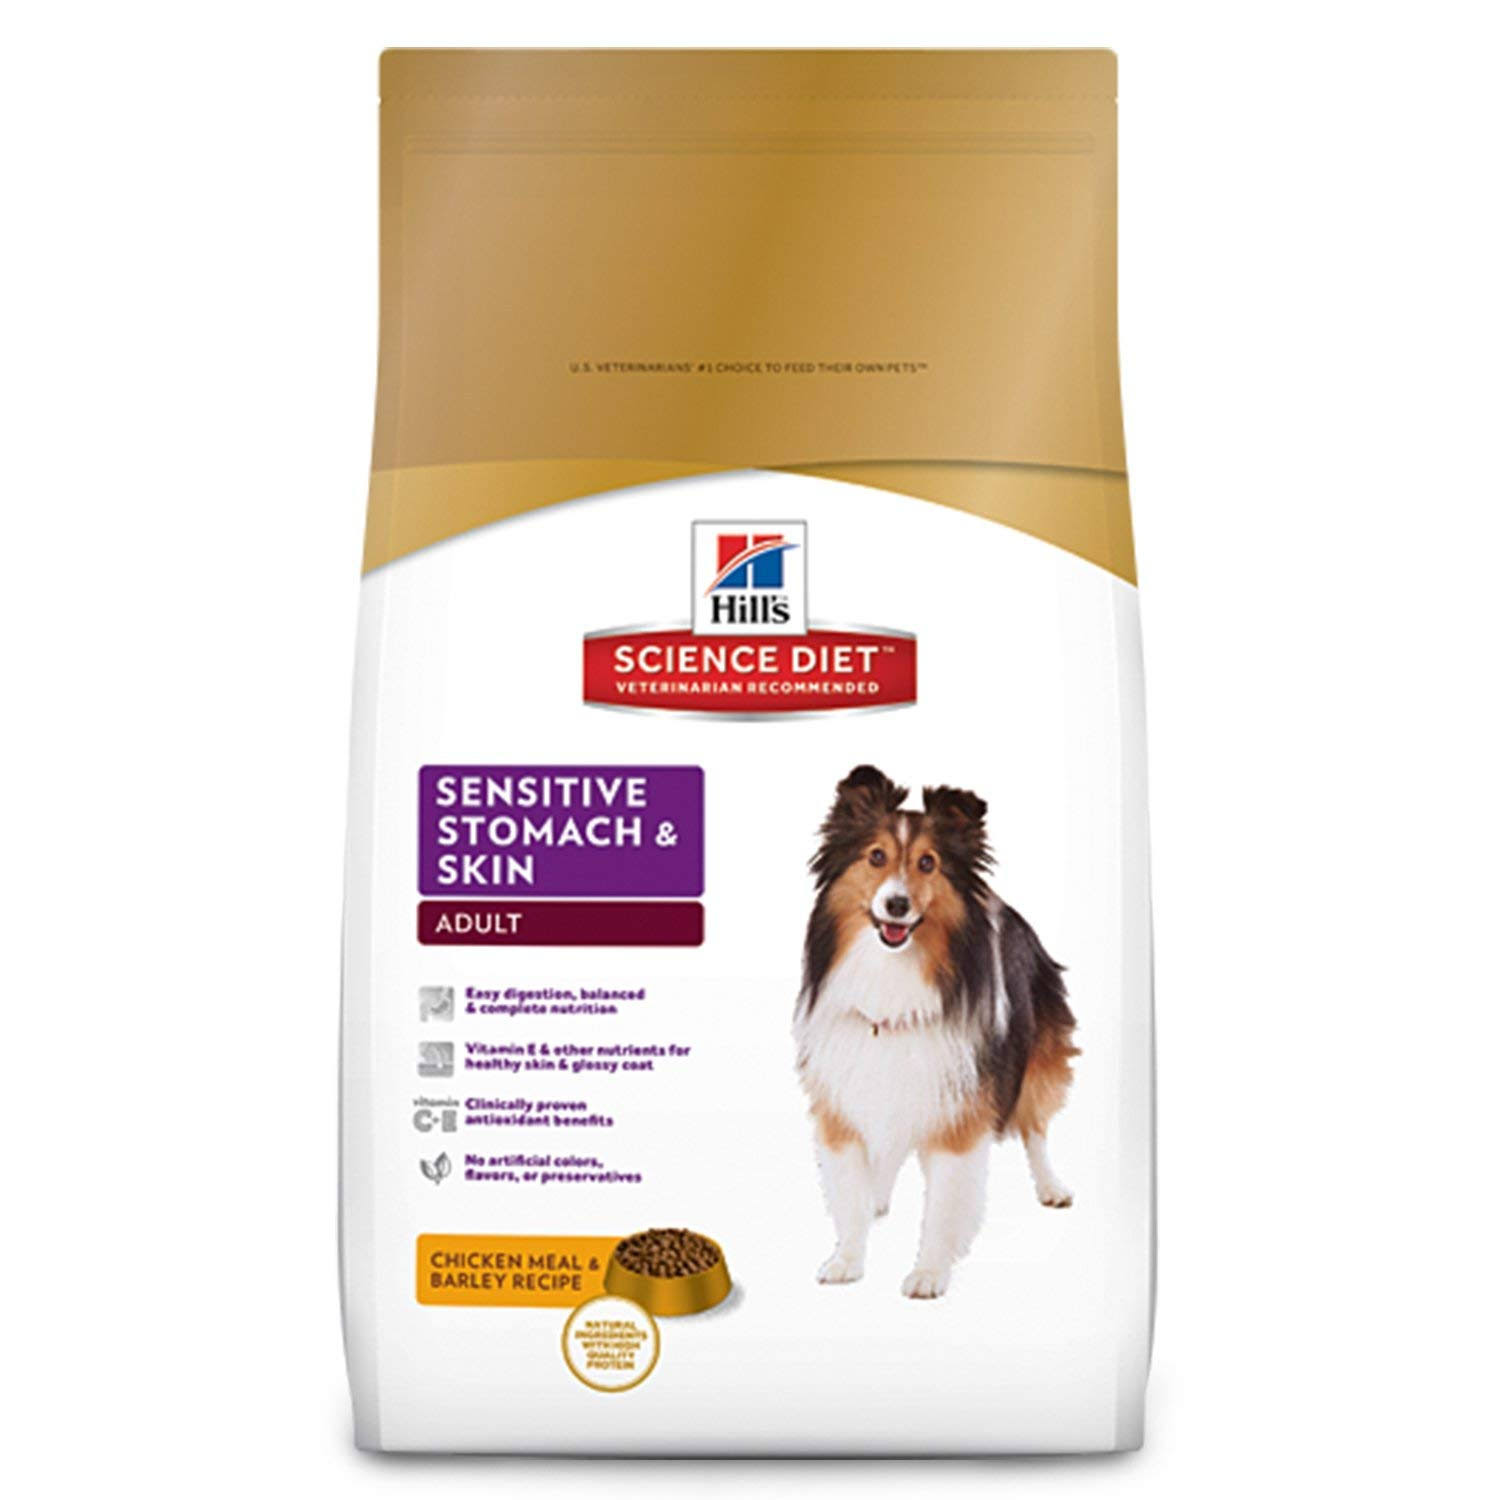 Hill's Science Diet Adult Sensitive Stomach and Skin Dry Dog Food - Chicken Meal and Barley Recipe, 4lb